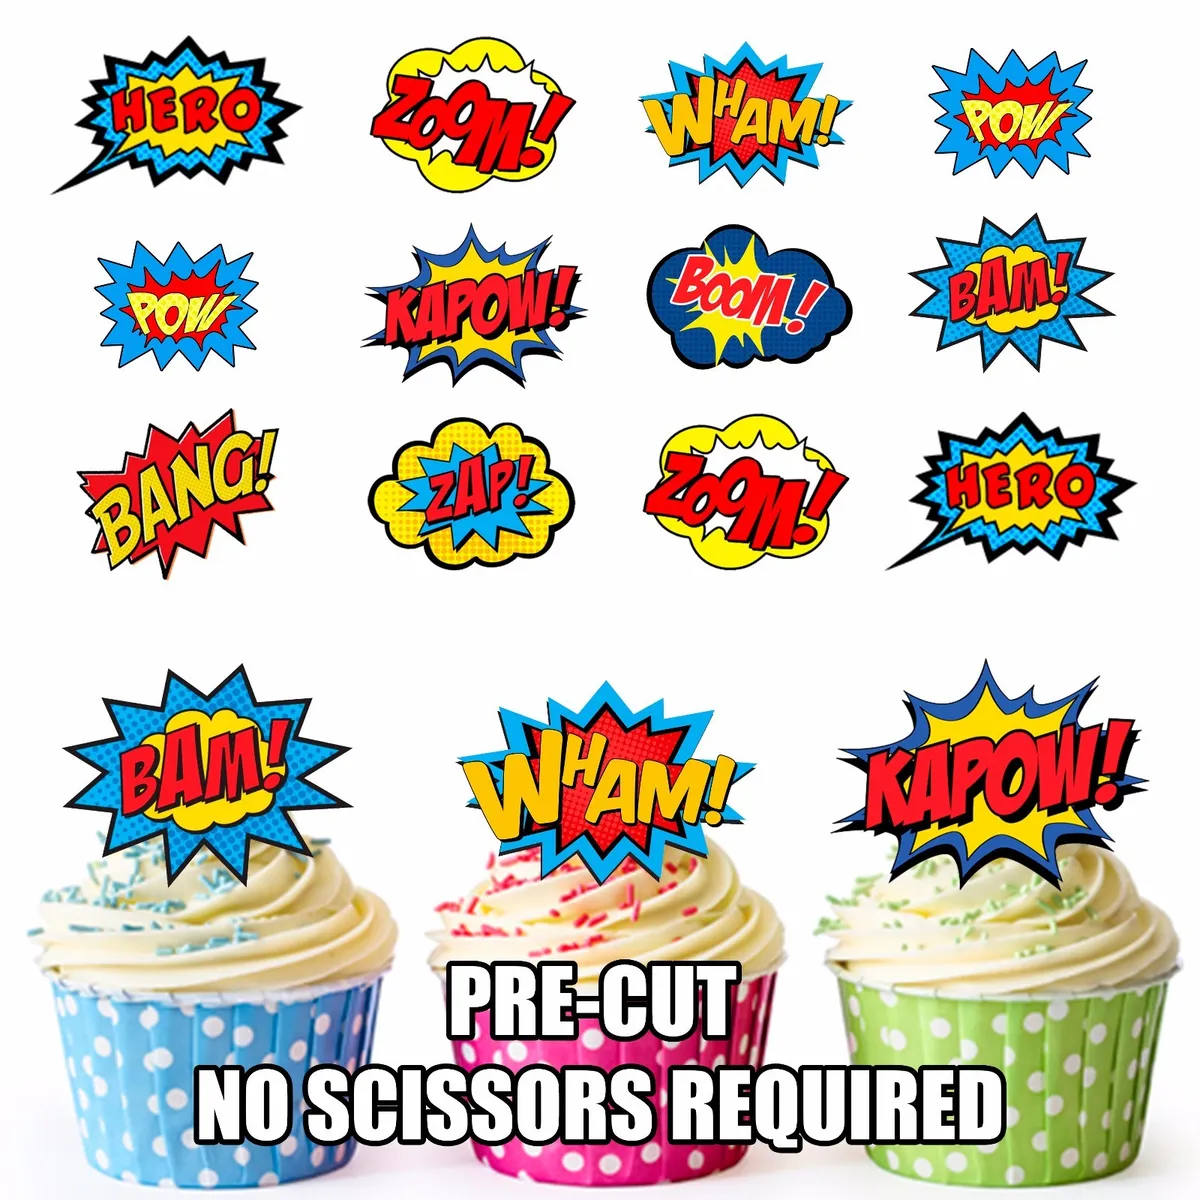 Amazon.com: Glitter Super Dad Cake Topper, Superhero Theme Father's Day Cake  Decor, Dad Birthday Party Decoration, Father's Day Supplies : Grocery &  Gourmet Food